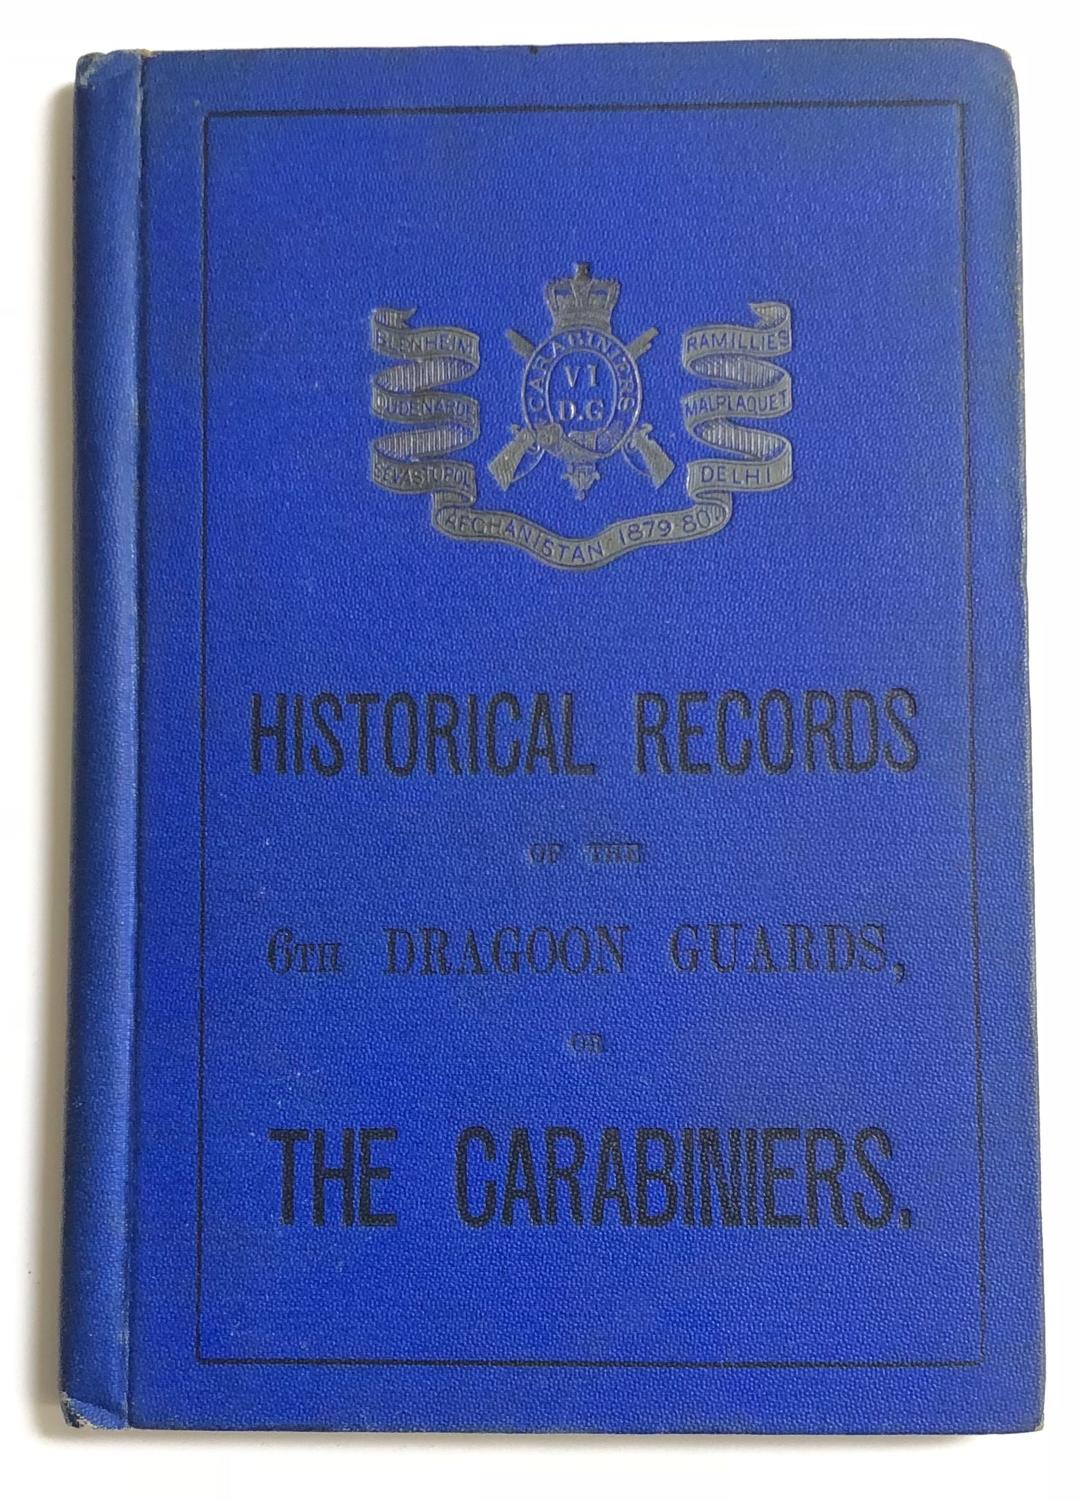 Historical Records of the 6th Dragoon Guards 1904.